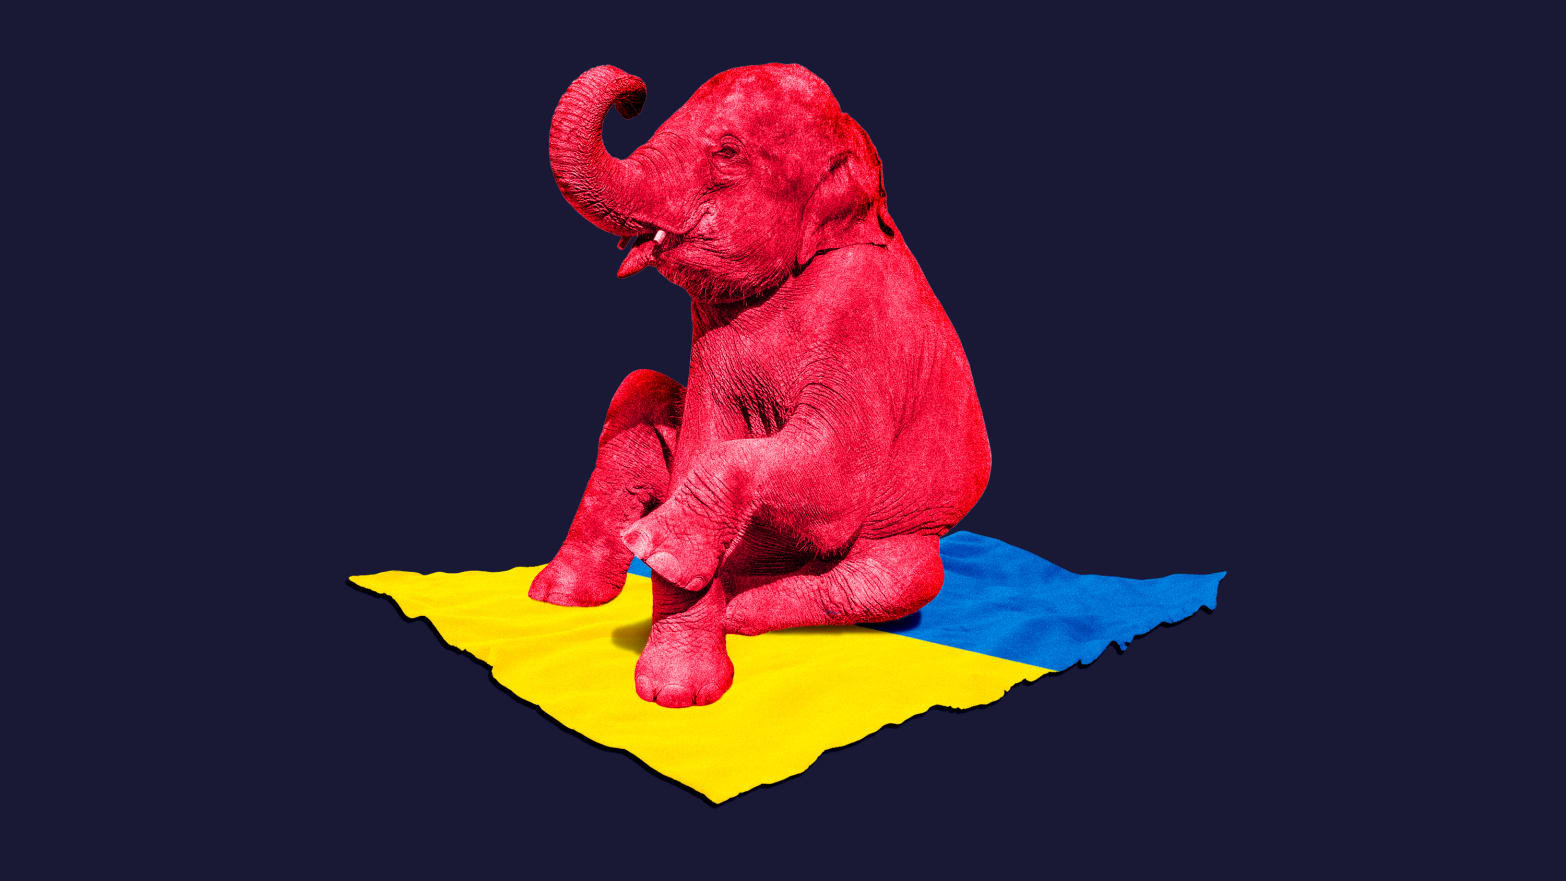 A photo illustration of a red elephant sitting on the Ukraine flag.